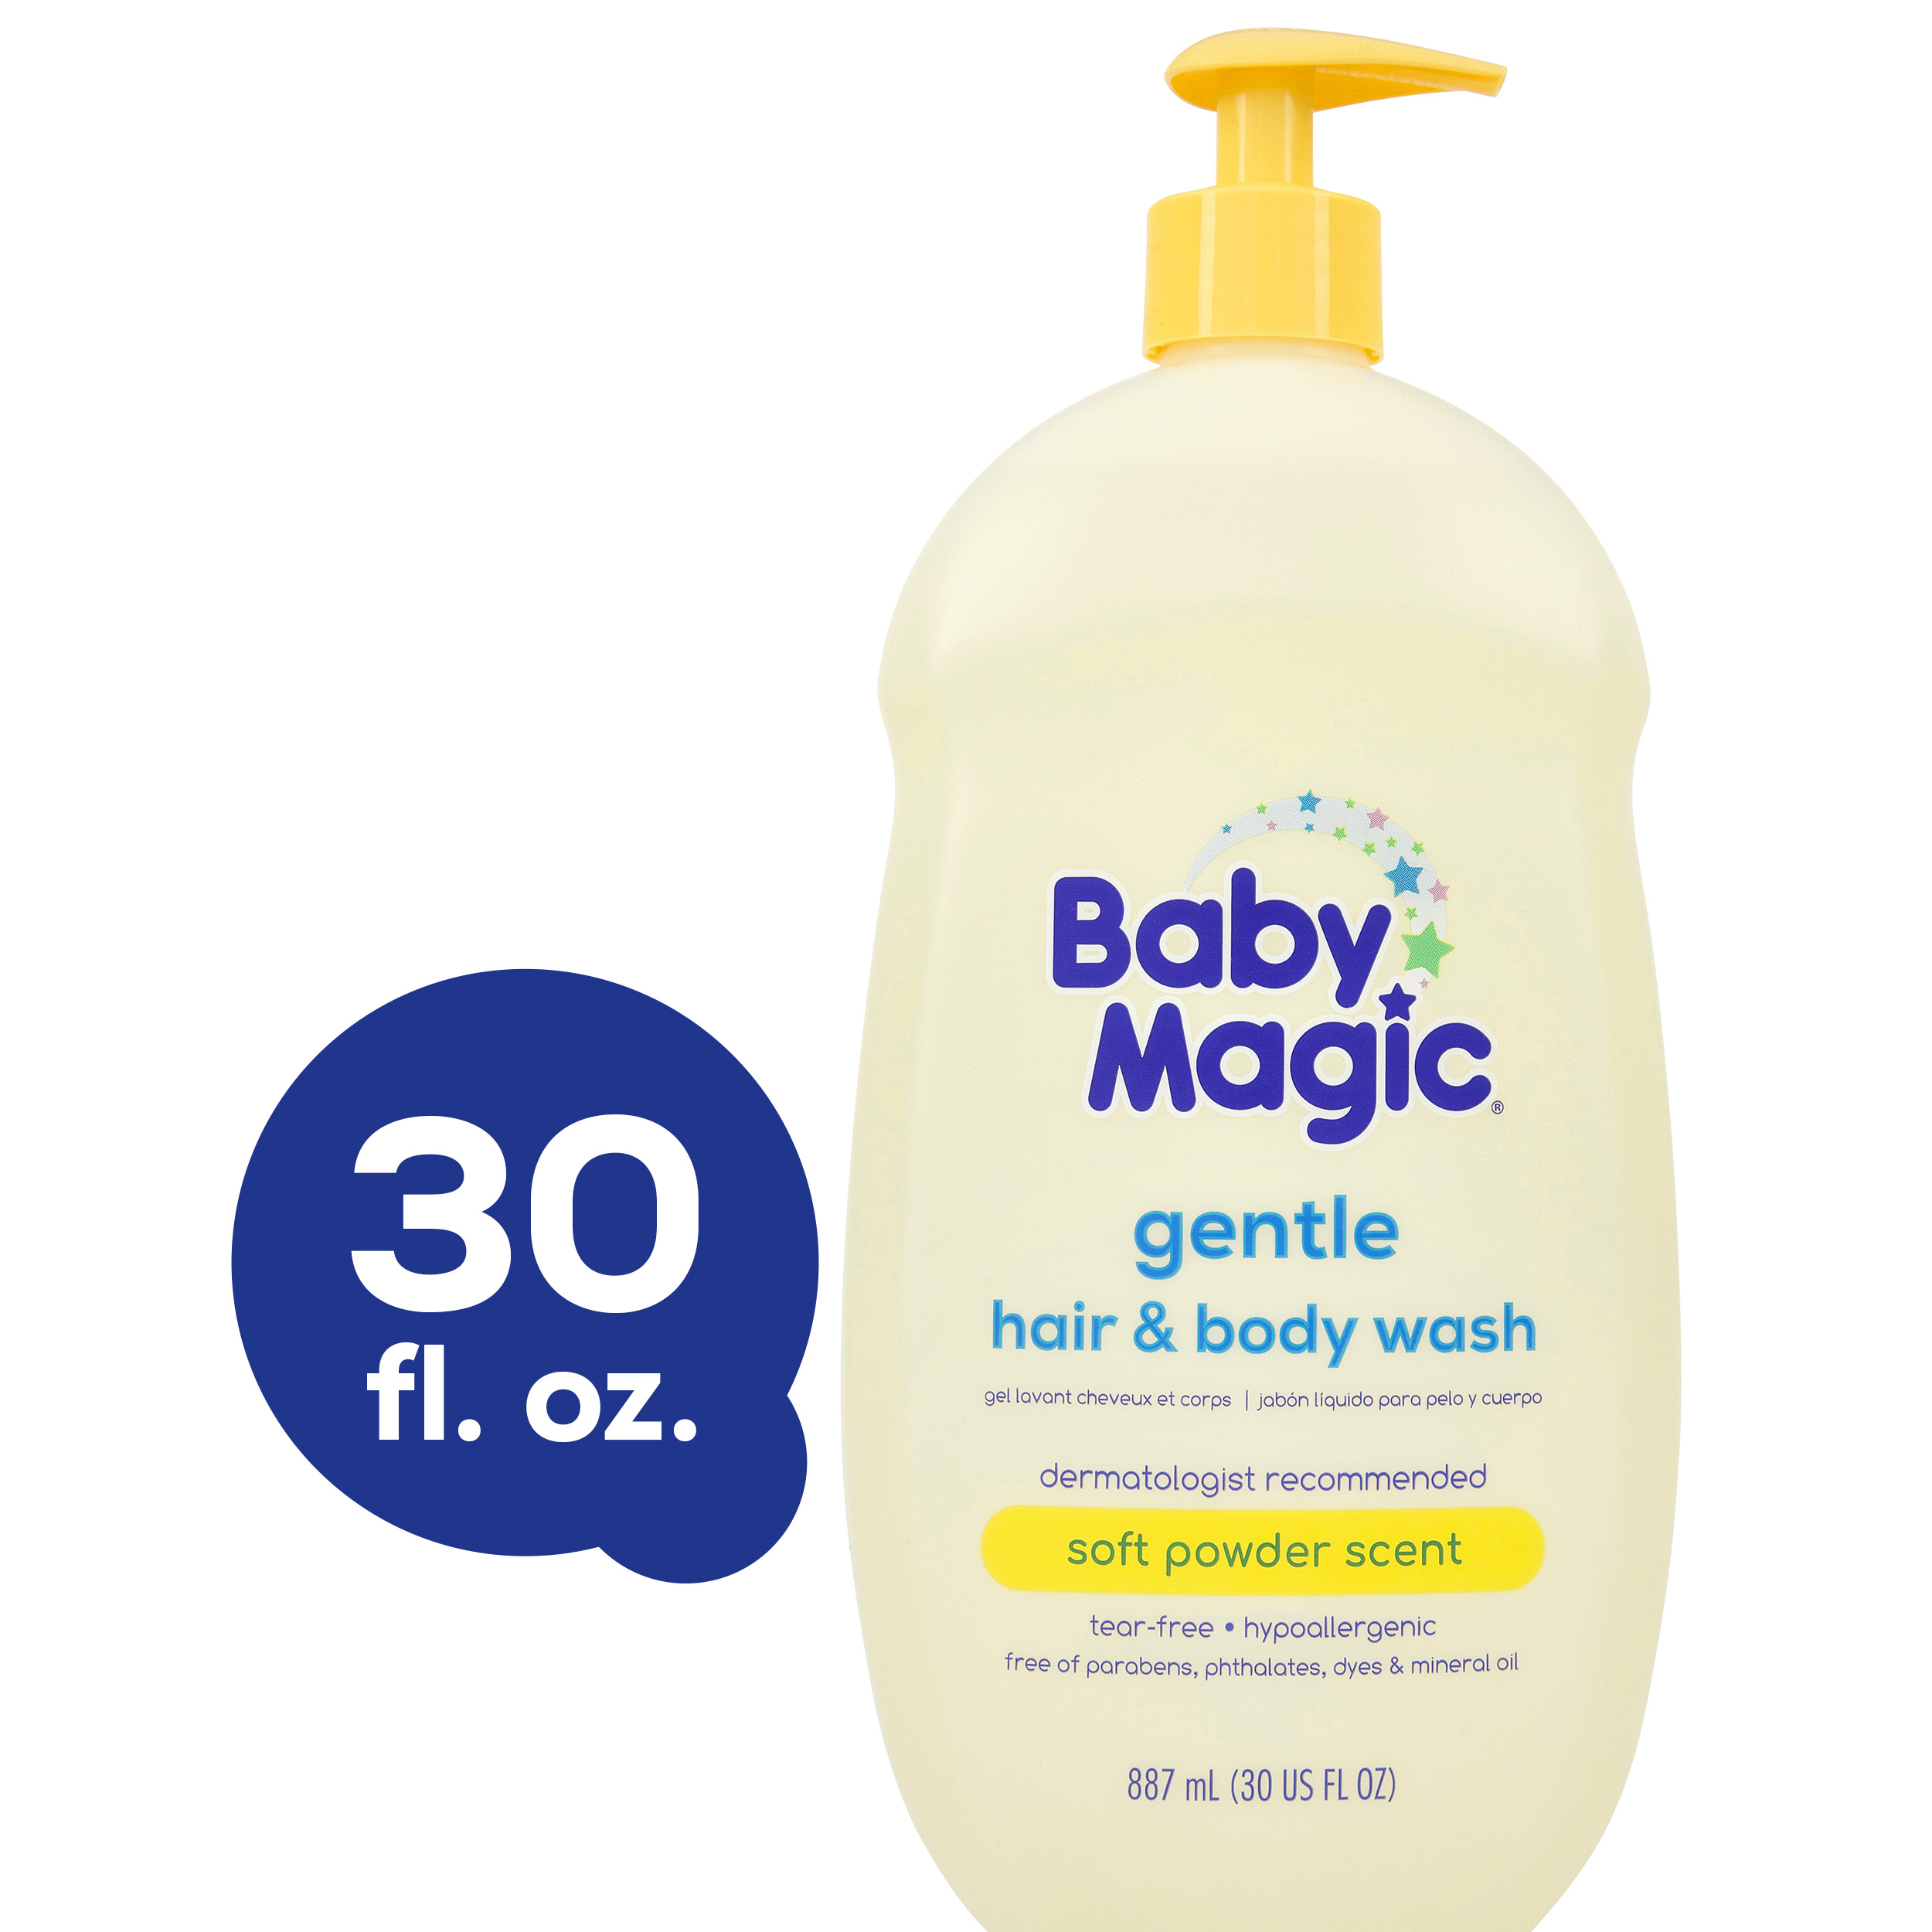 Baby Magic Tear-Free Gentle Hair and Body Wash, Soft Powder Scent, Hypoallergenic, 30 oz - image 1 of 7